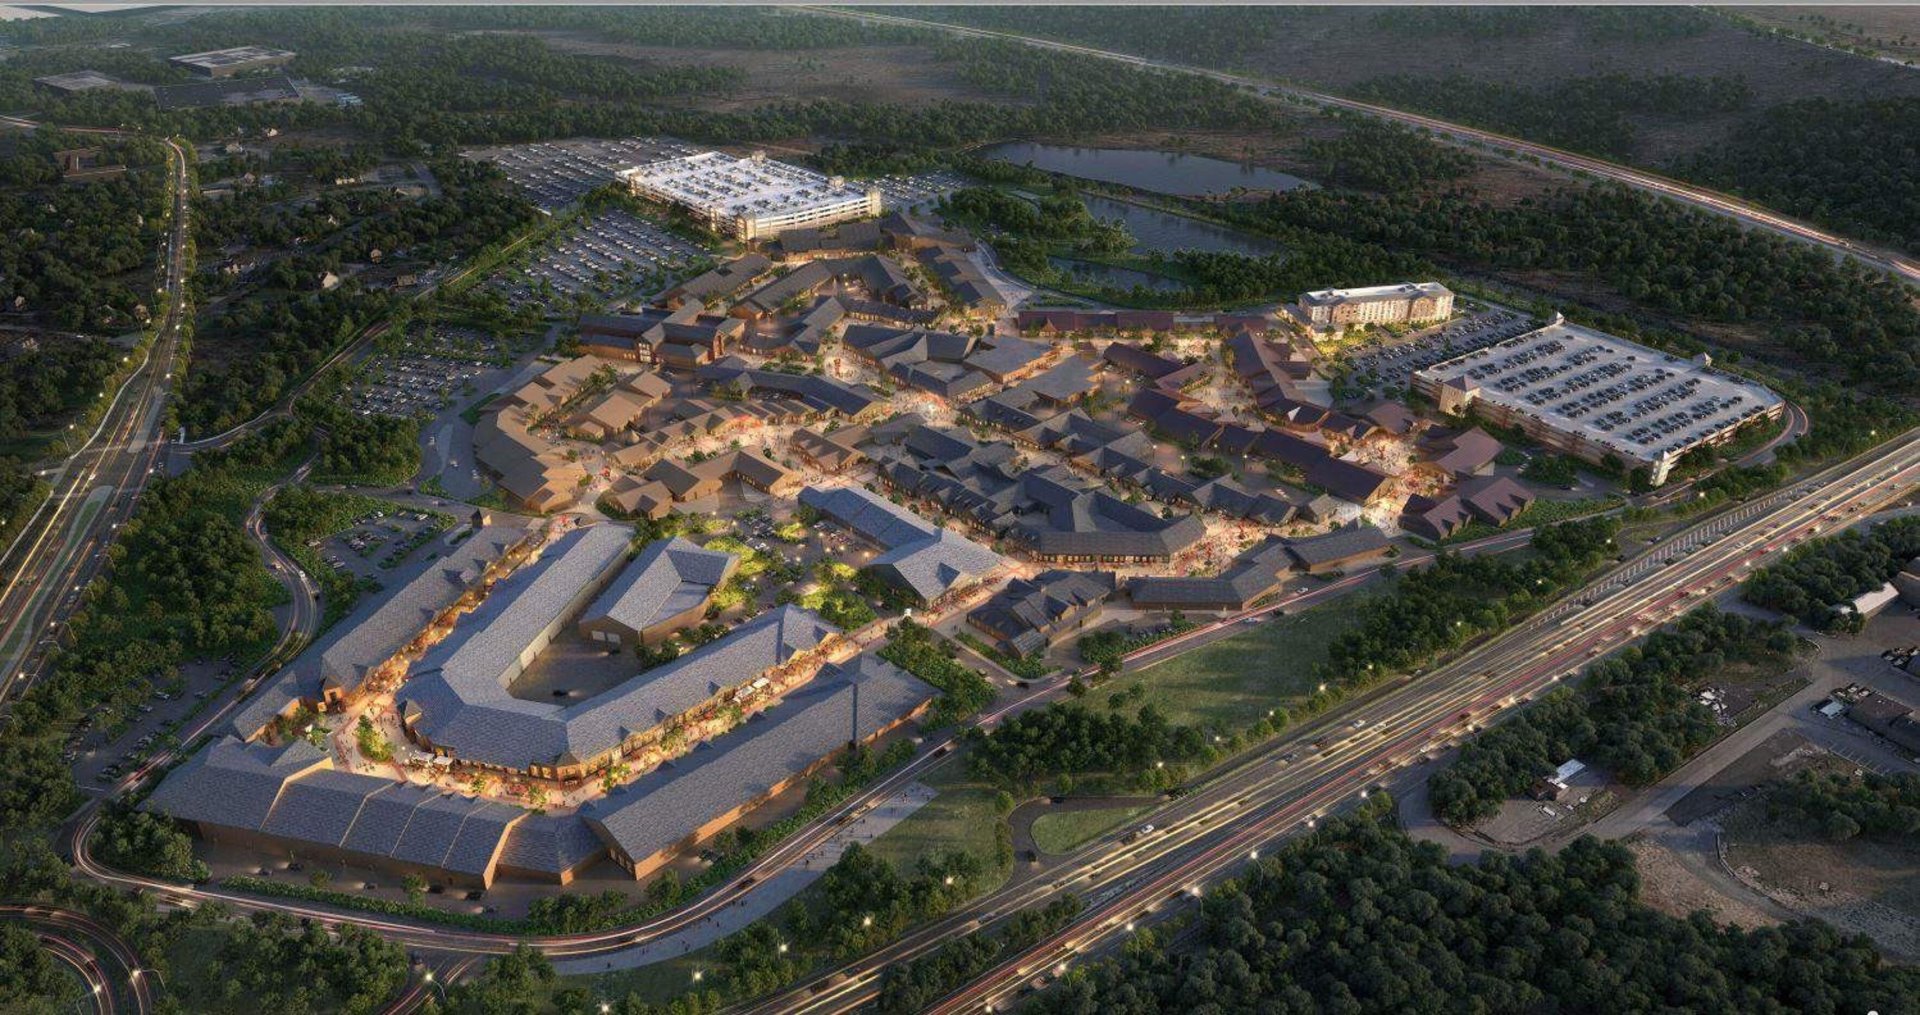 Woodbury Common Premium Outlets Shopping Tour, from NYC 2023 - New